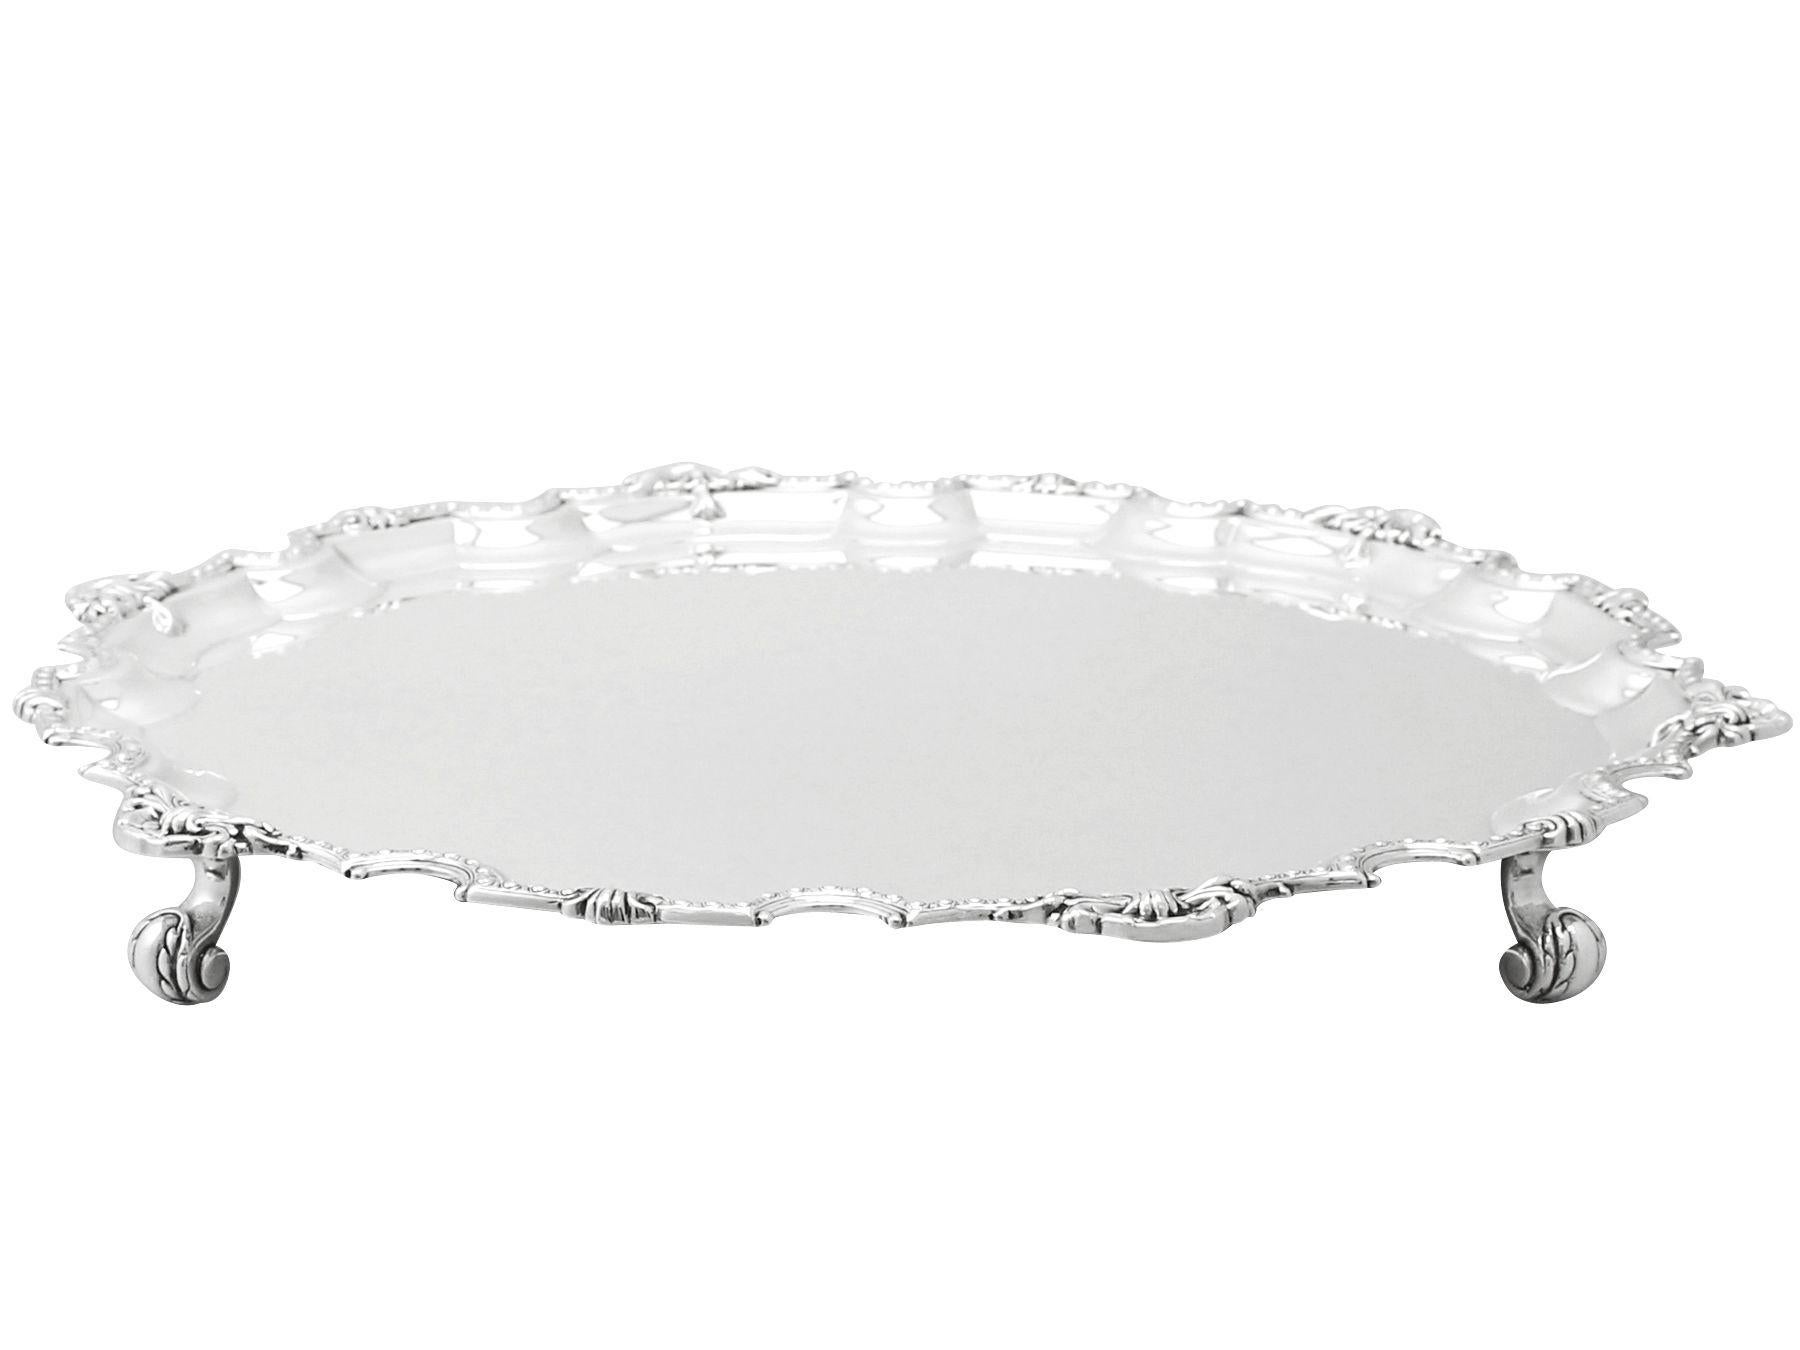 An exceptional, fine and impressive vintage Elizabeth II English sterling silver salver; an addition to our silver dining collection.

This exceptional vintage Elizabeth II English sterling silver salver has a circular shaped form onto four